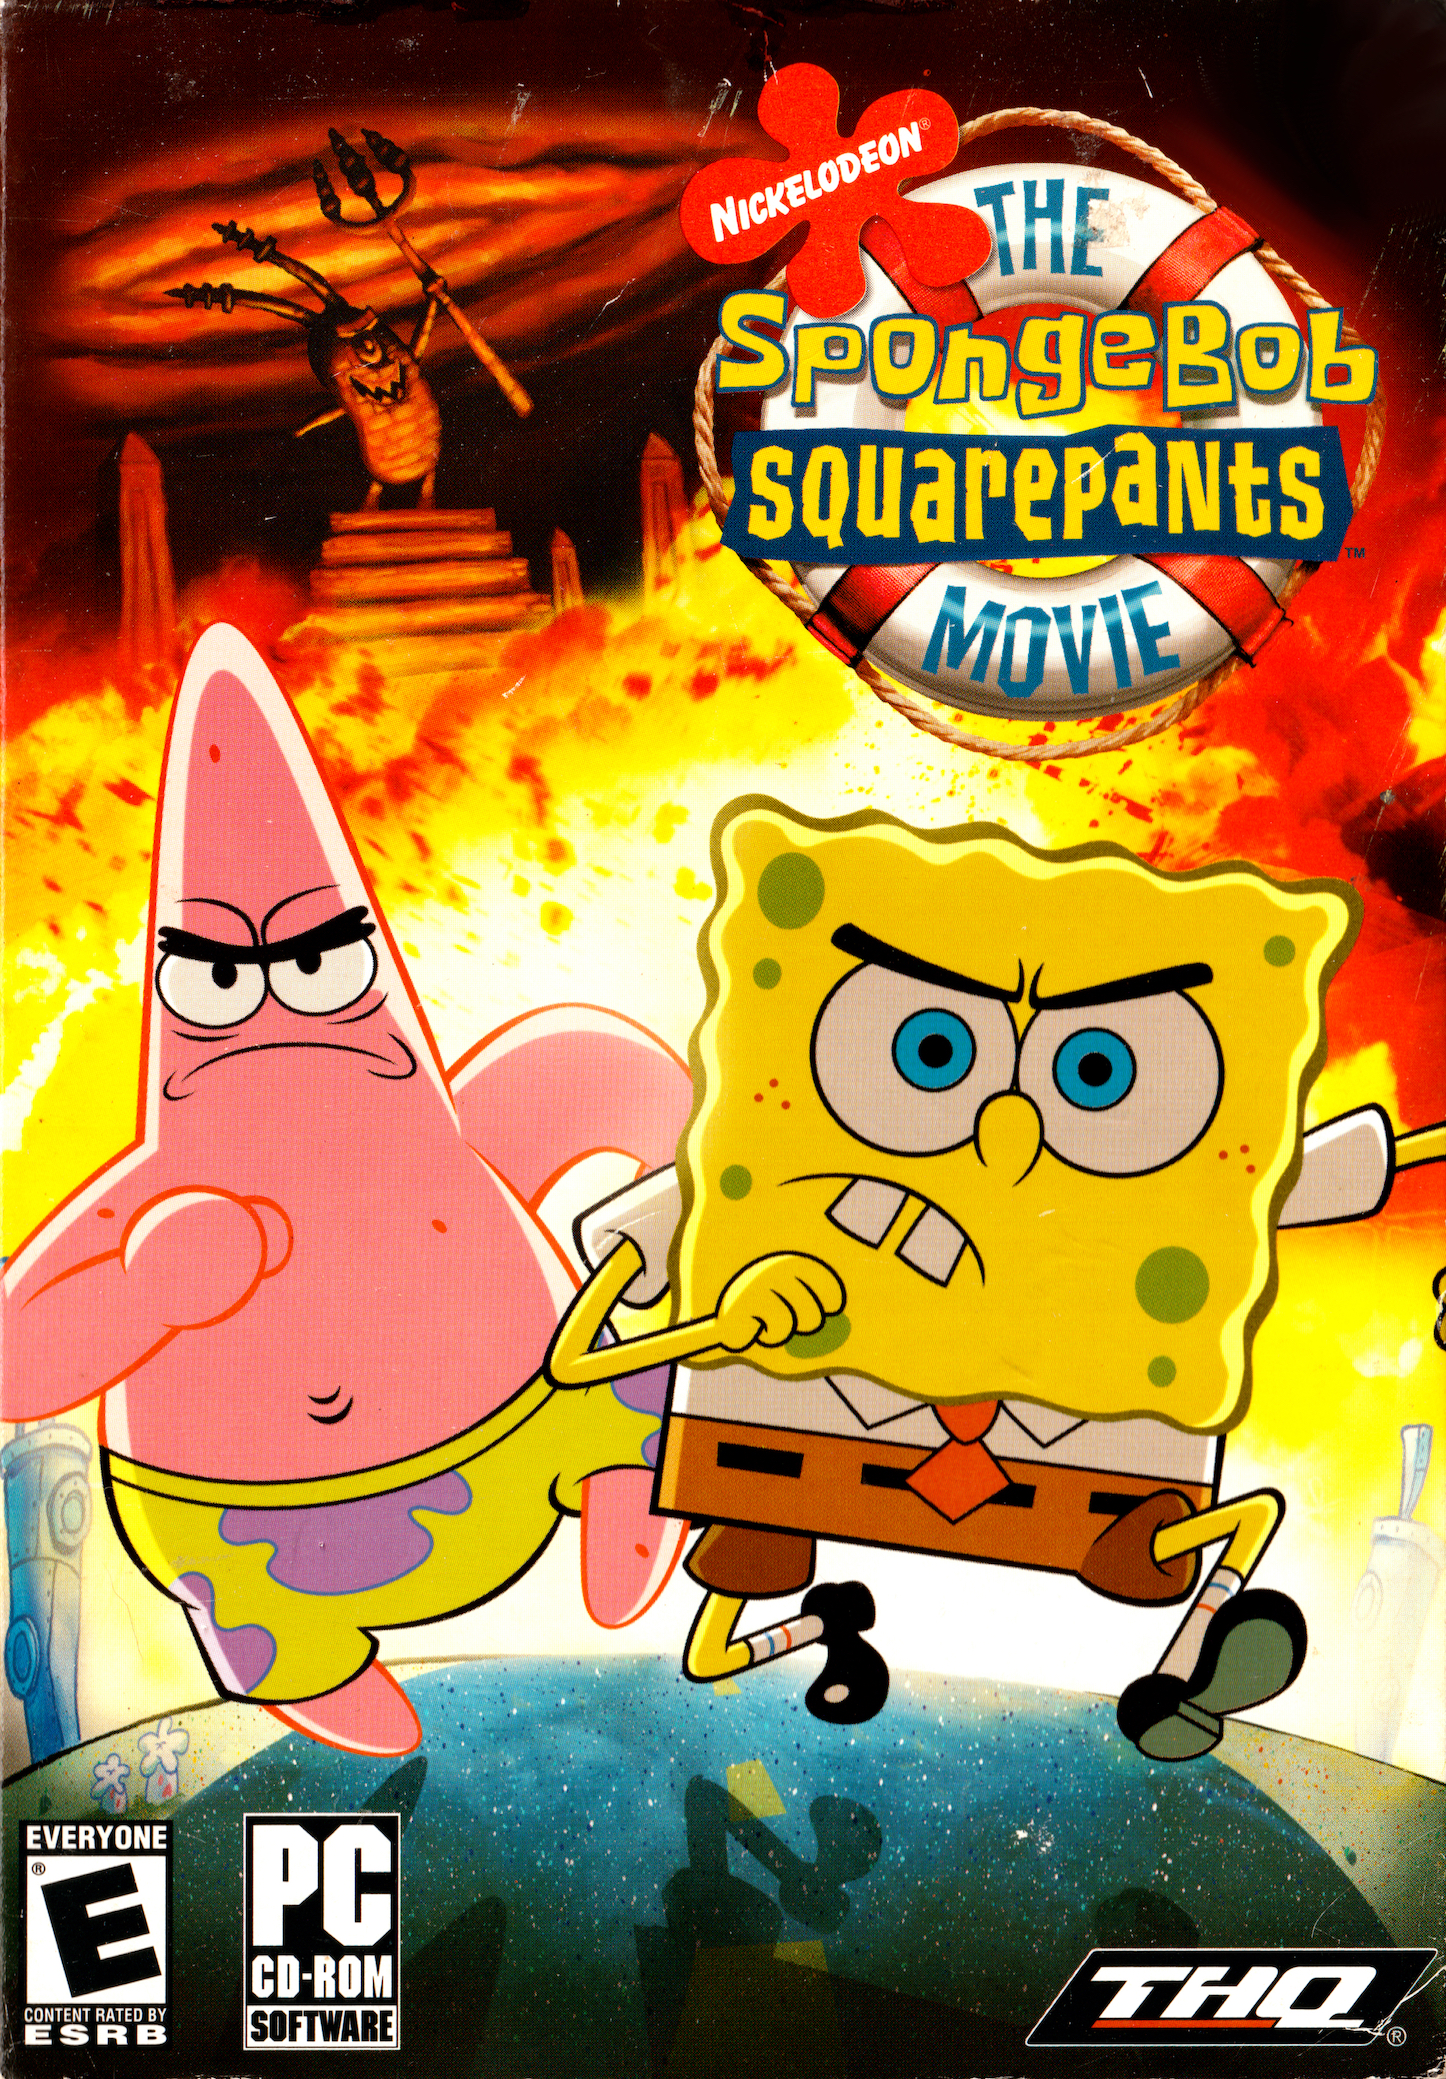 spongebob the movie game pc download fullypcgames